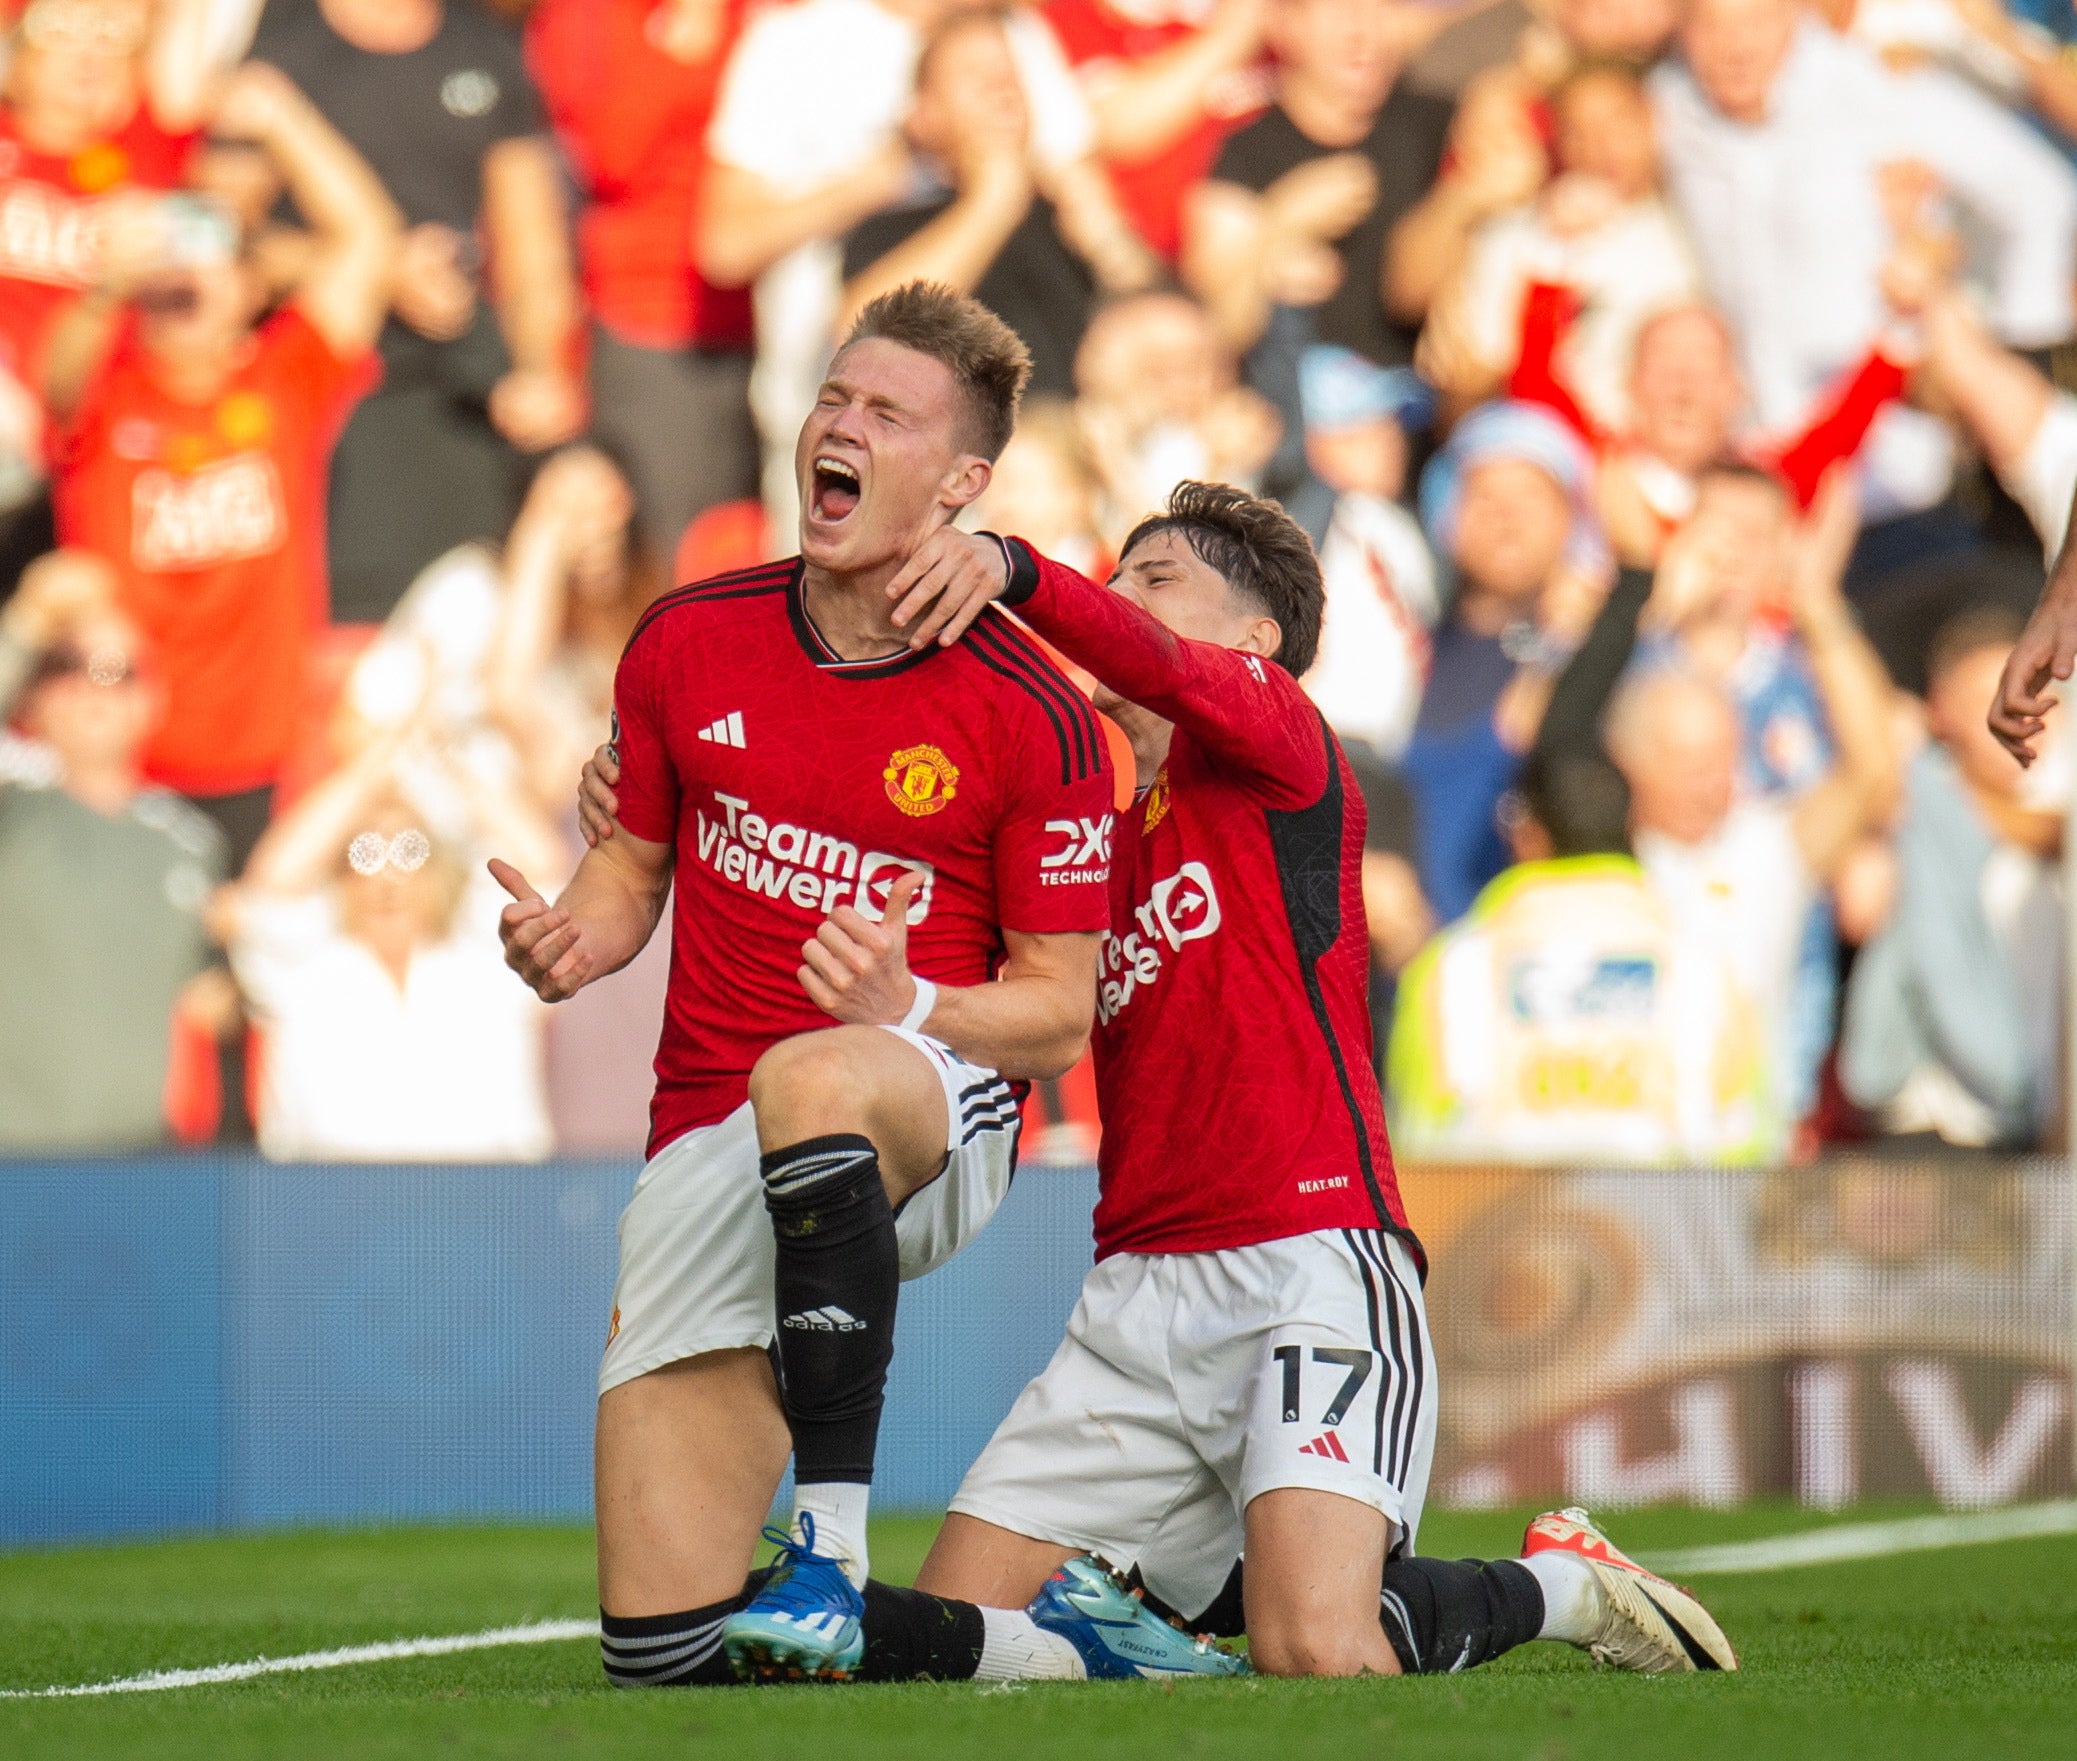 Two late goals from Scott McTominay ensured Man United beat Brentford 2-1 in their Premier League clash